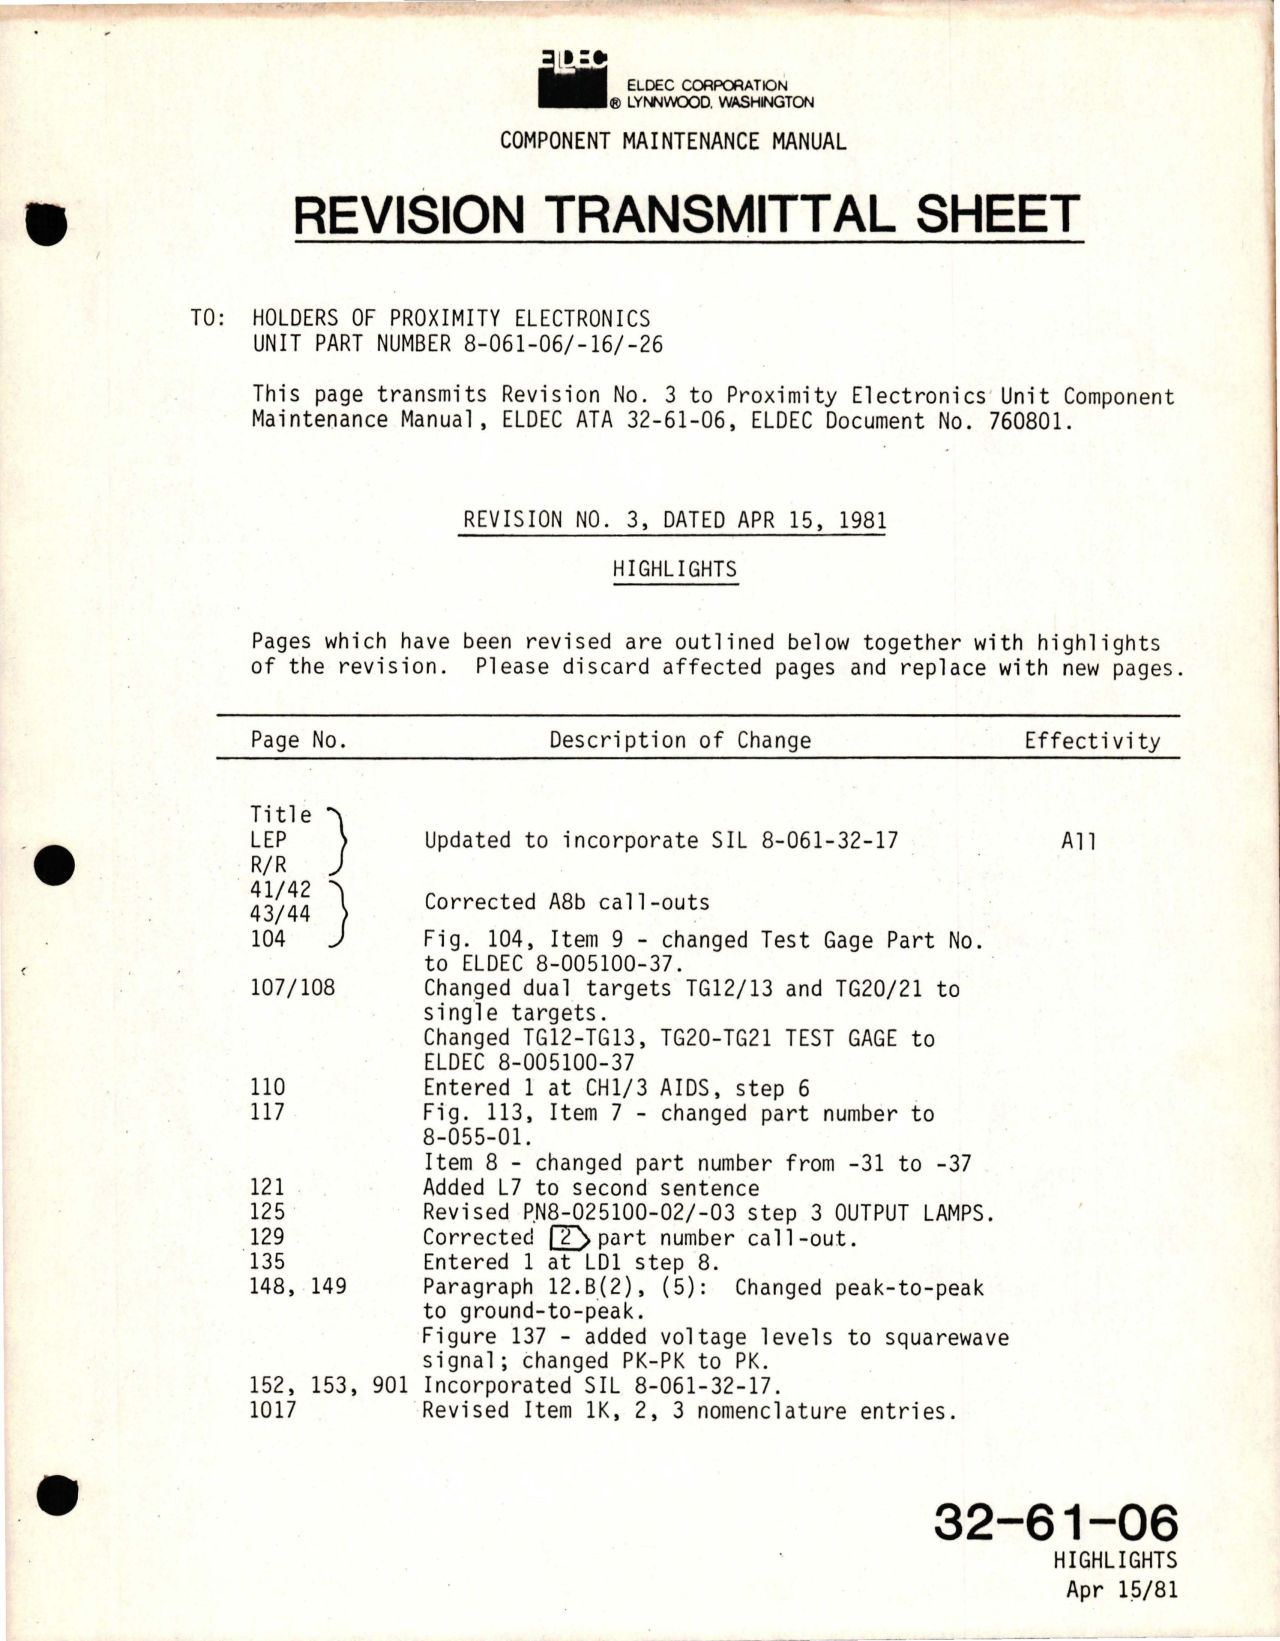 Sample page 7 from AirCorps Library document: Maintenance Manual with Illustrated Parts List for Proximity Electronics Unit - Parts 8-061-06, 8-061-16, and 8-061-26 